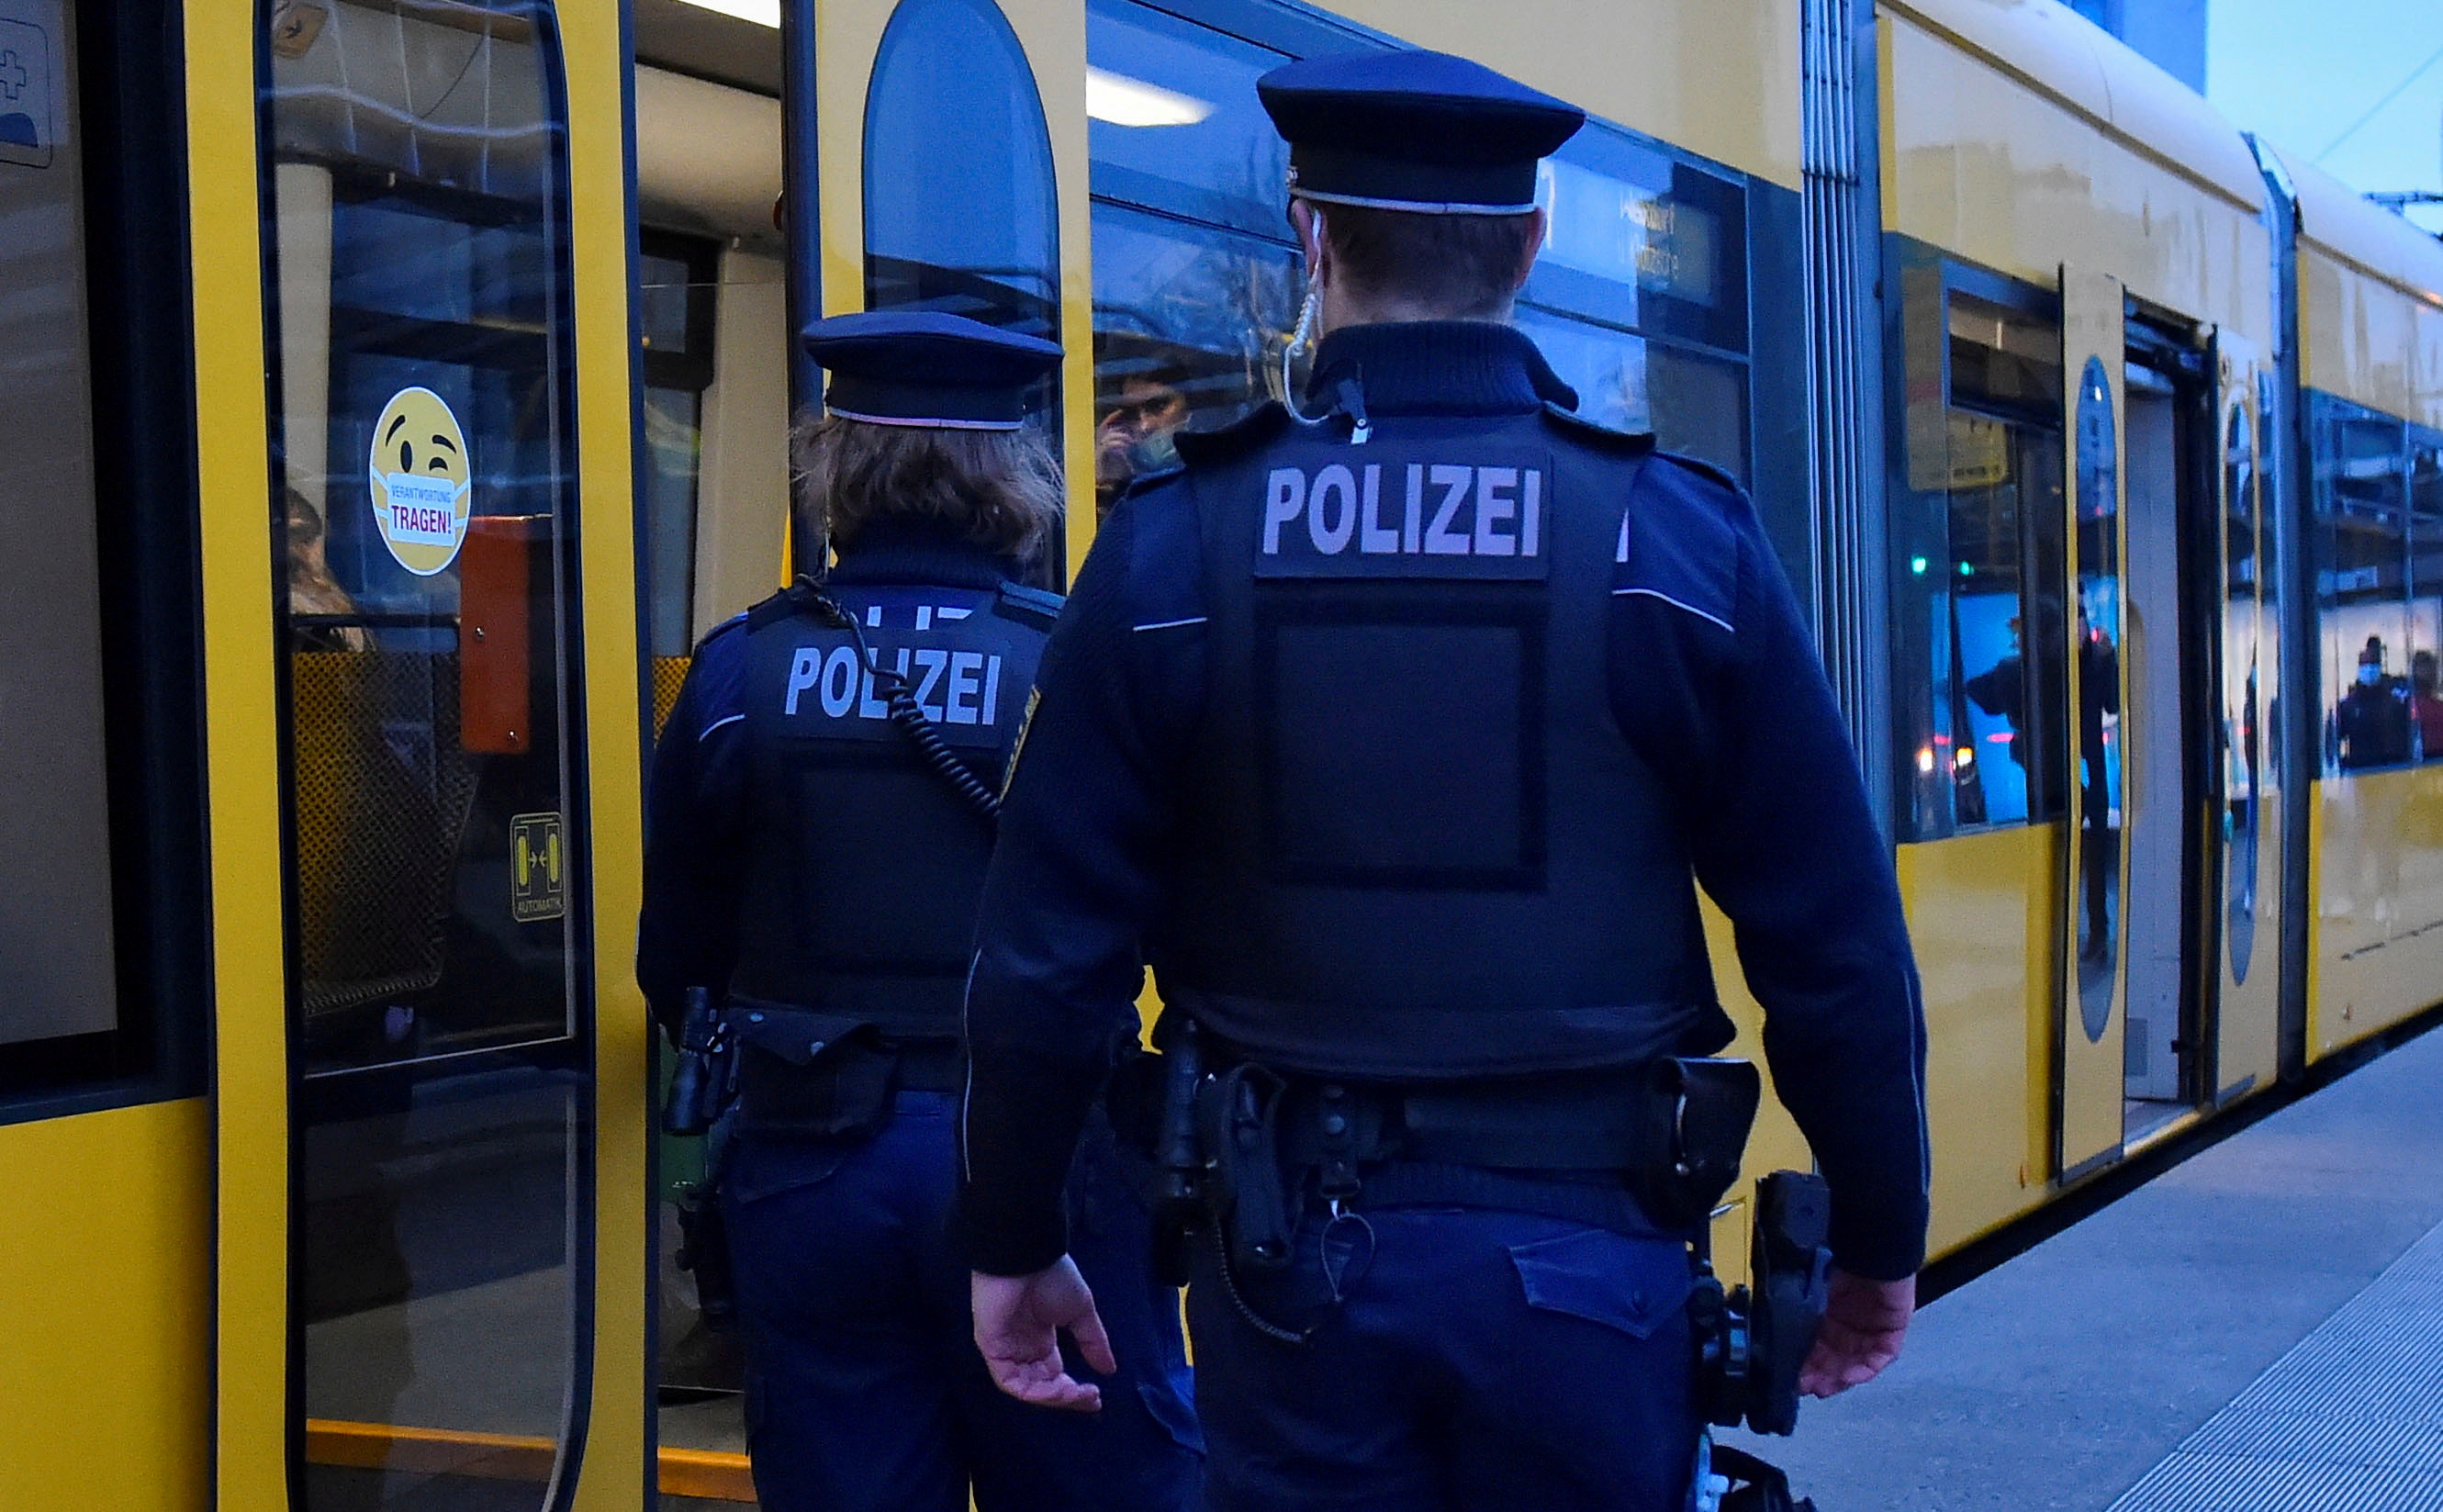 Police officers enter a tram as they check the coronavirus disease (COVID-19) protocol in Dresden, Germany, November 23, 2021. REUTERS/Matthias Rietschel